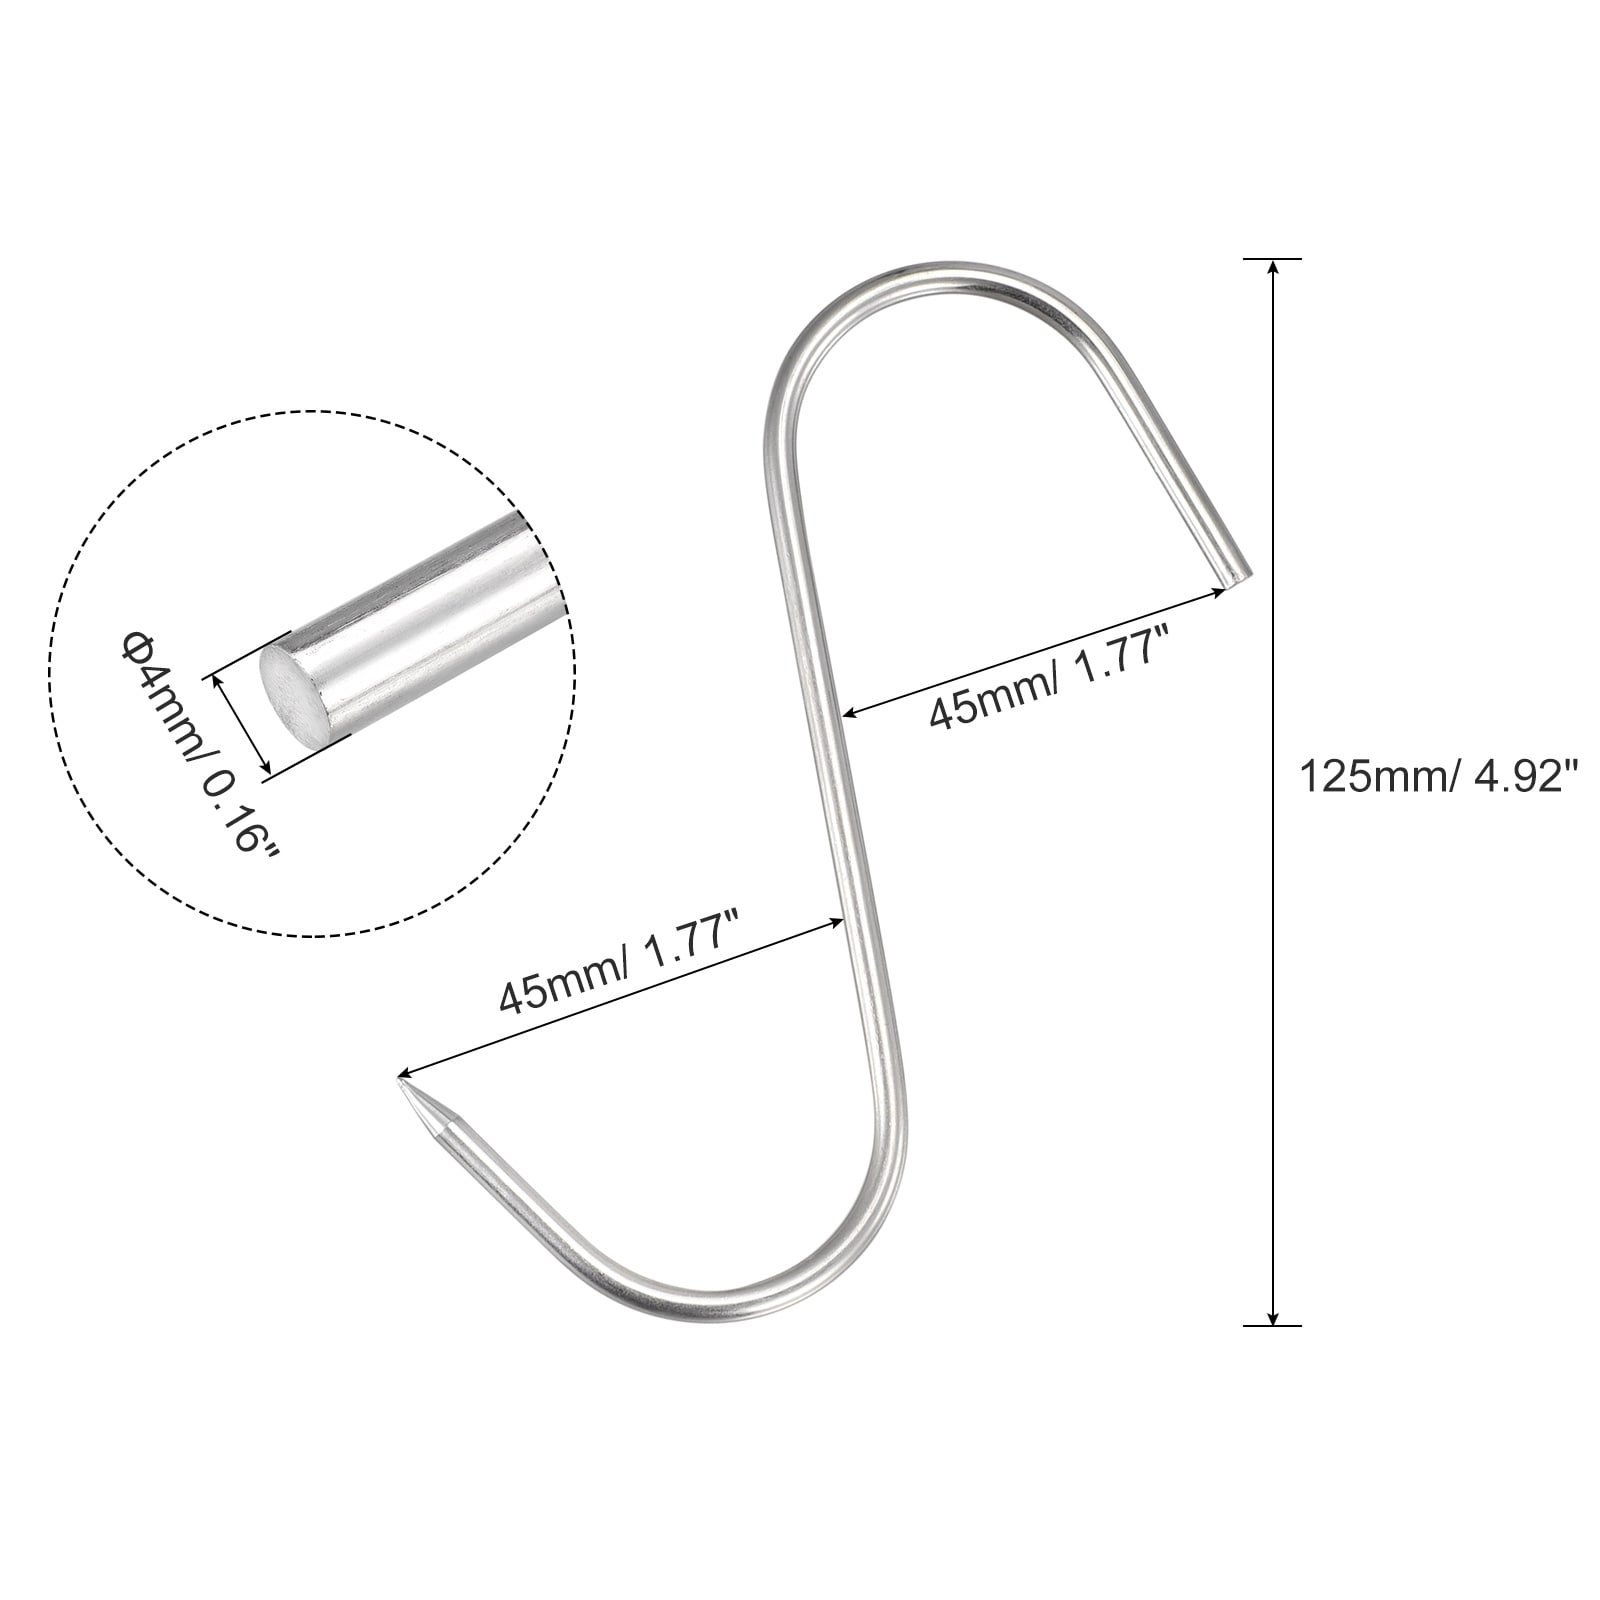 https://ak1.ostkcdn.com/images/products/is/images/direct/a0ad9282c5abee42b9d96ddccb408cb3689da40c/Meat-Hooks%2C-Stainless-Steel-S-Hook-Meat-Processing-for-Chicken-Hanging.jpg